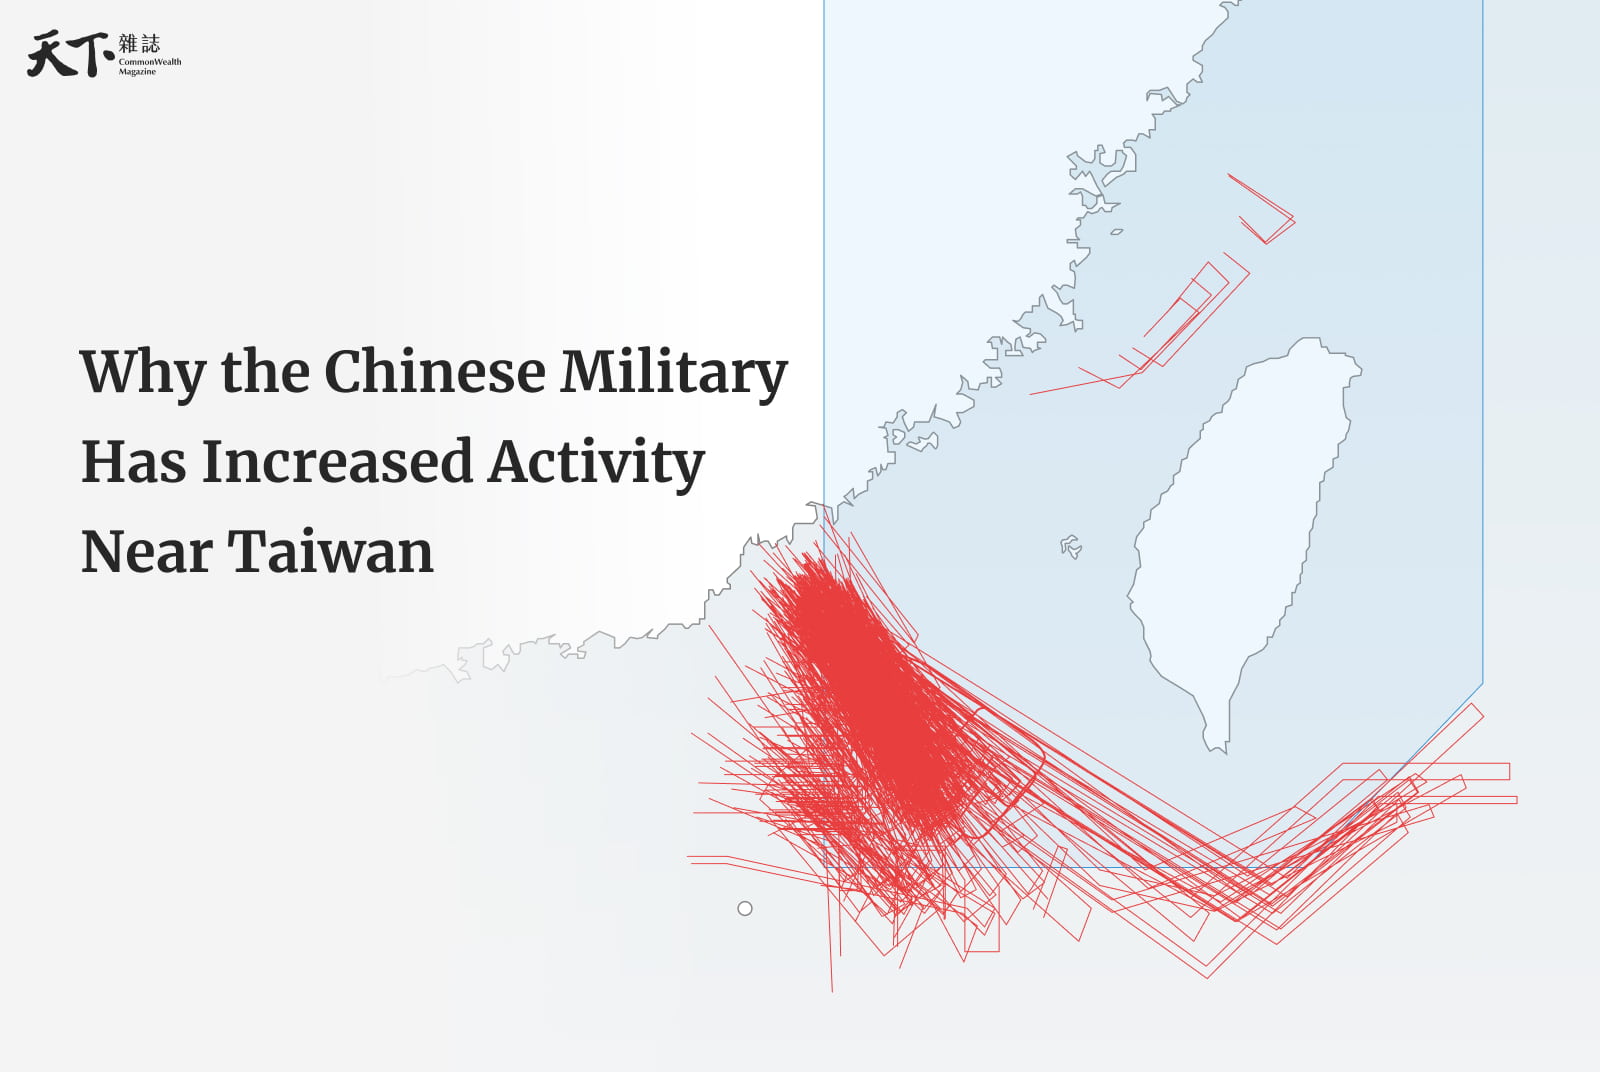 Why the Chinese military has increased activity near Taiwan